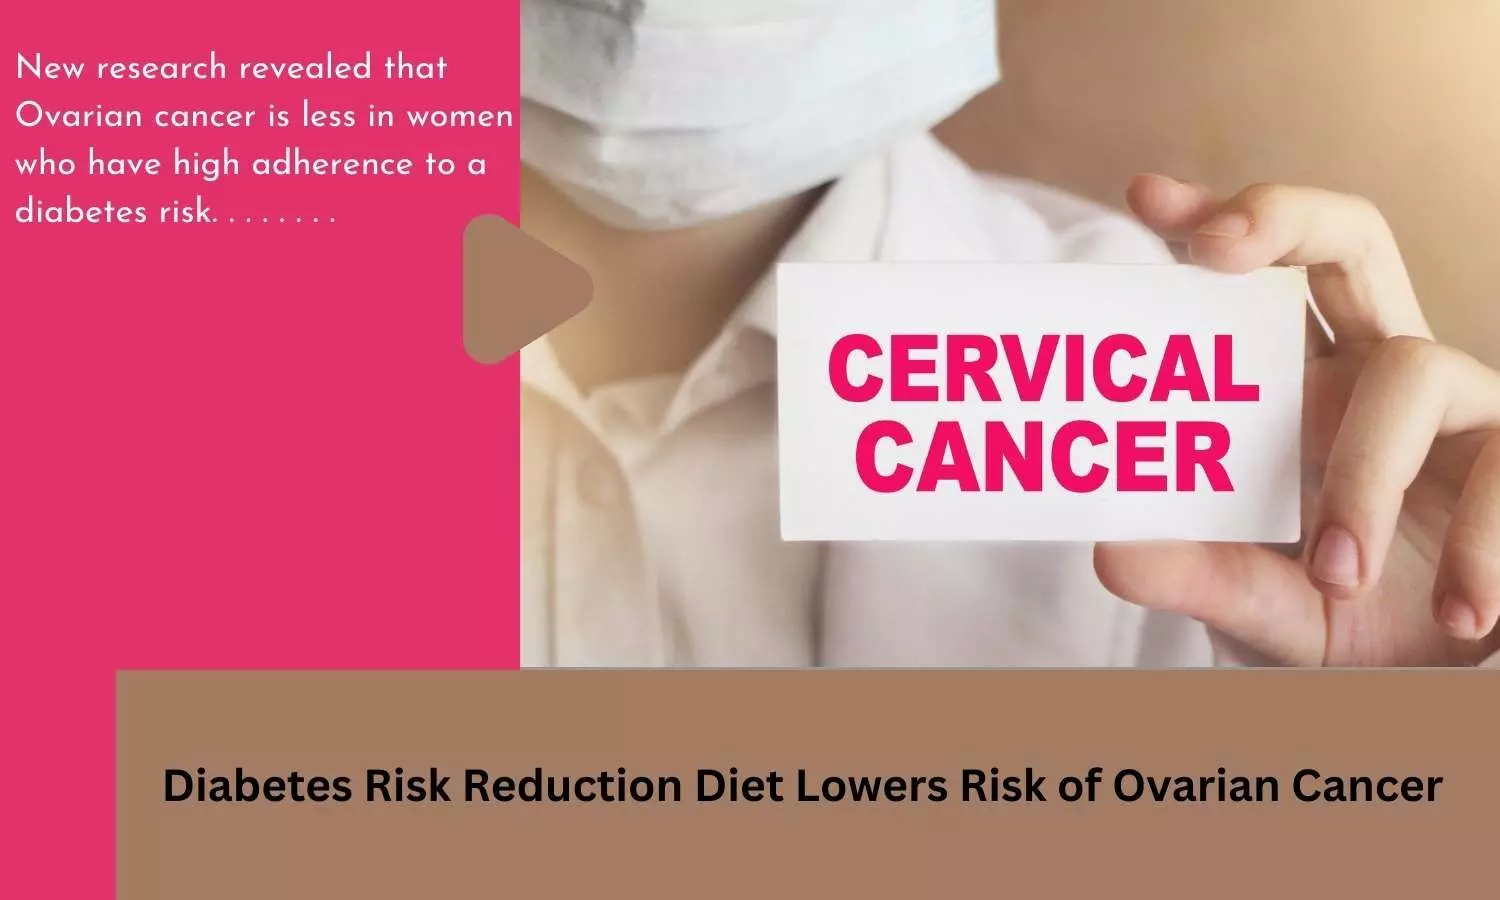 Diabetes Risk Reduction Diet Lowers Risk of Ovarian Cancer